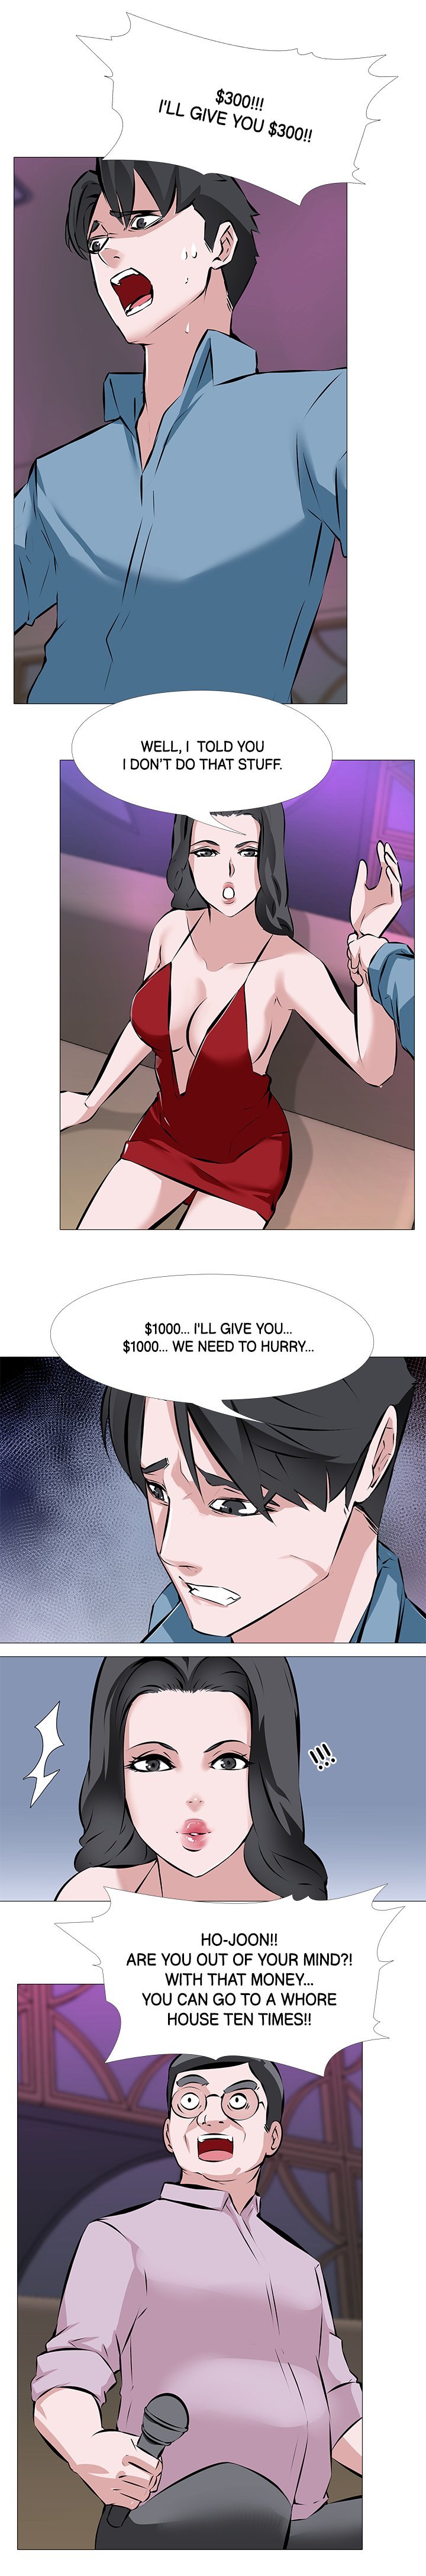 wife-game-chap-2-10